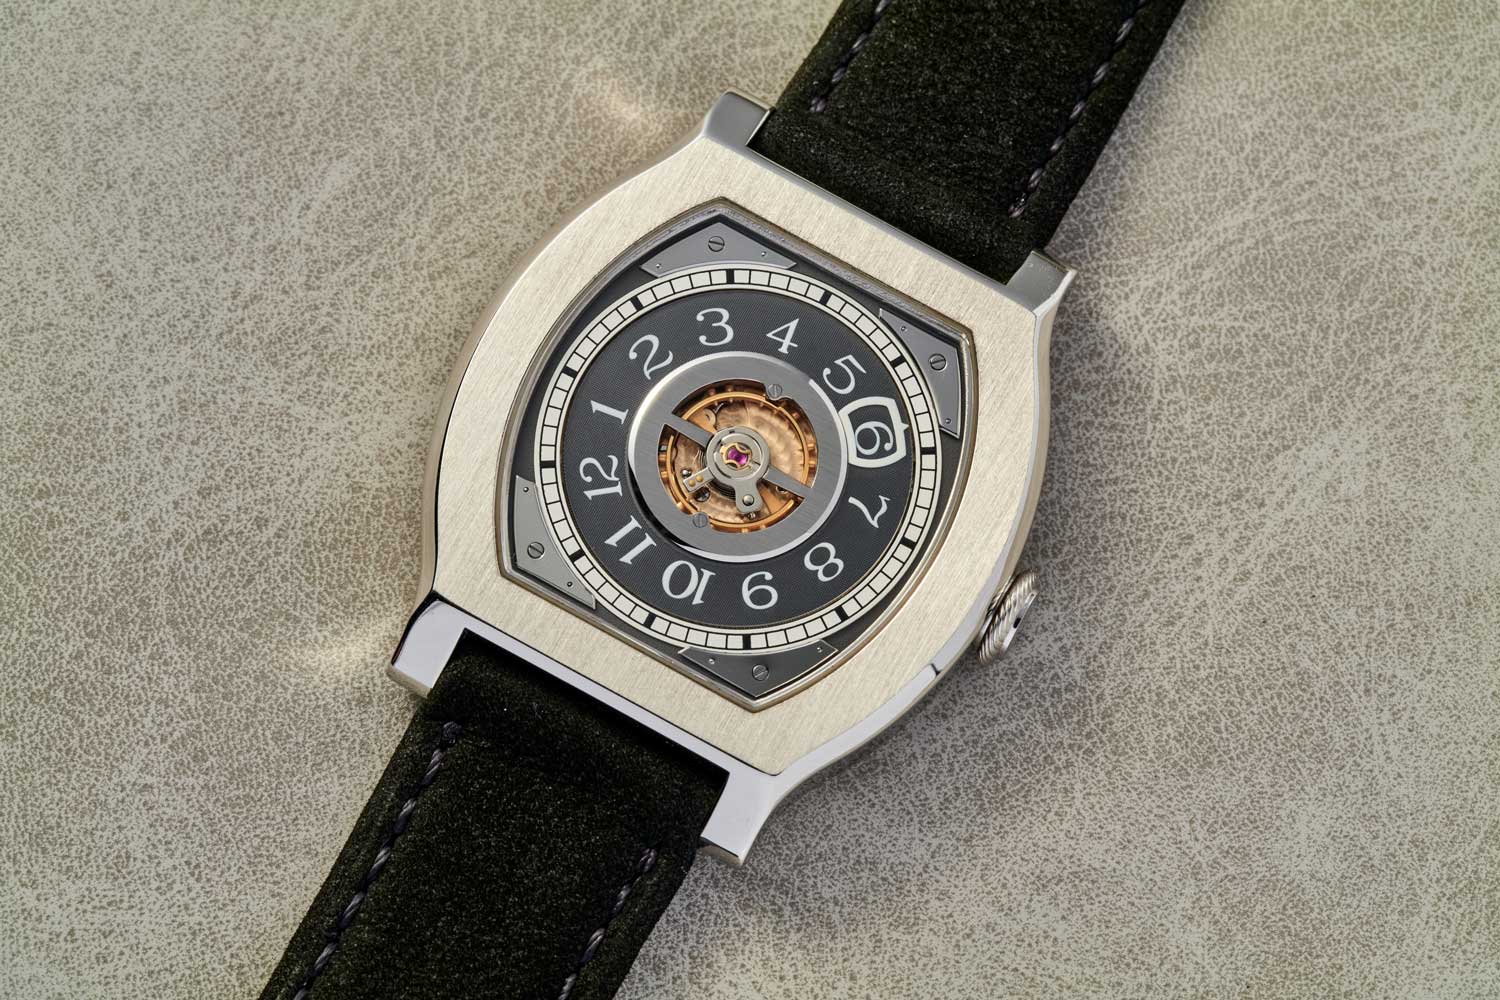 The first of the tortue-shaped, jumping-hour Vagabondage series, the Vagabondage I with a central balance wheel features an hour disk with an hour numeral encircled by a white aperture, printed on a transparent disk above. Both disks rotate in synch but at the turn of the hour, the aperture disk jumps to encircle the next hour.